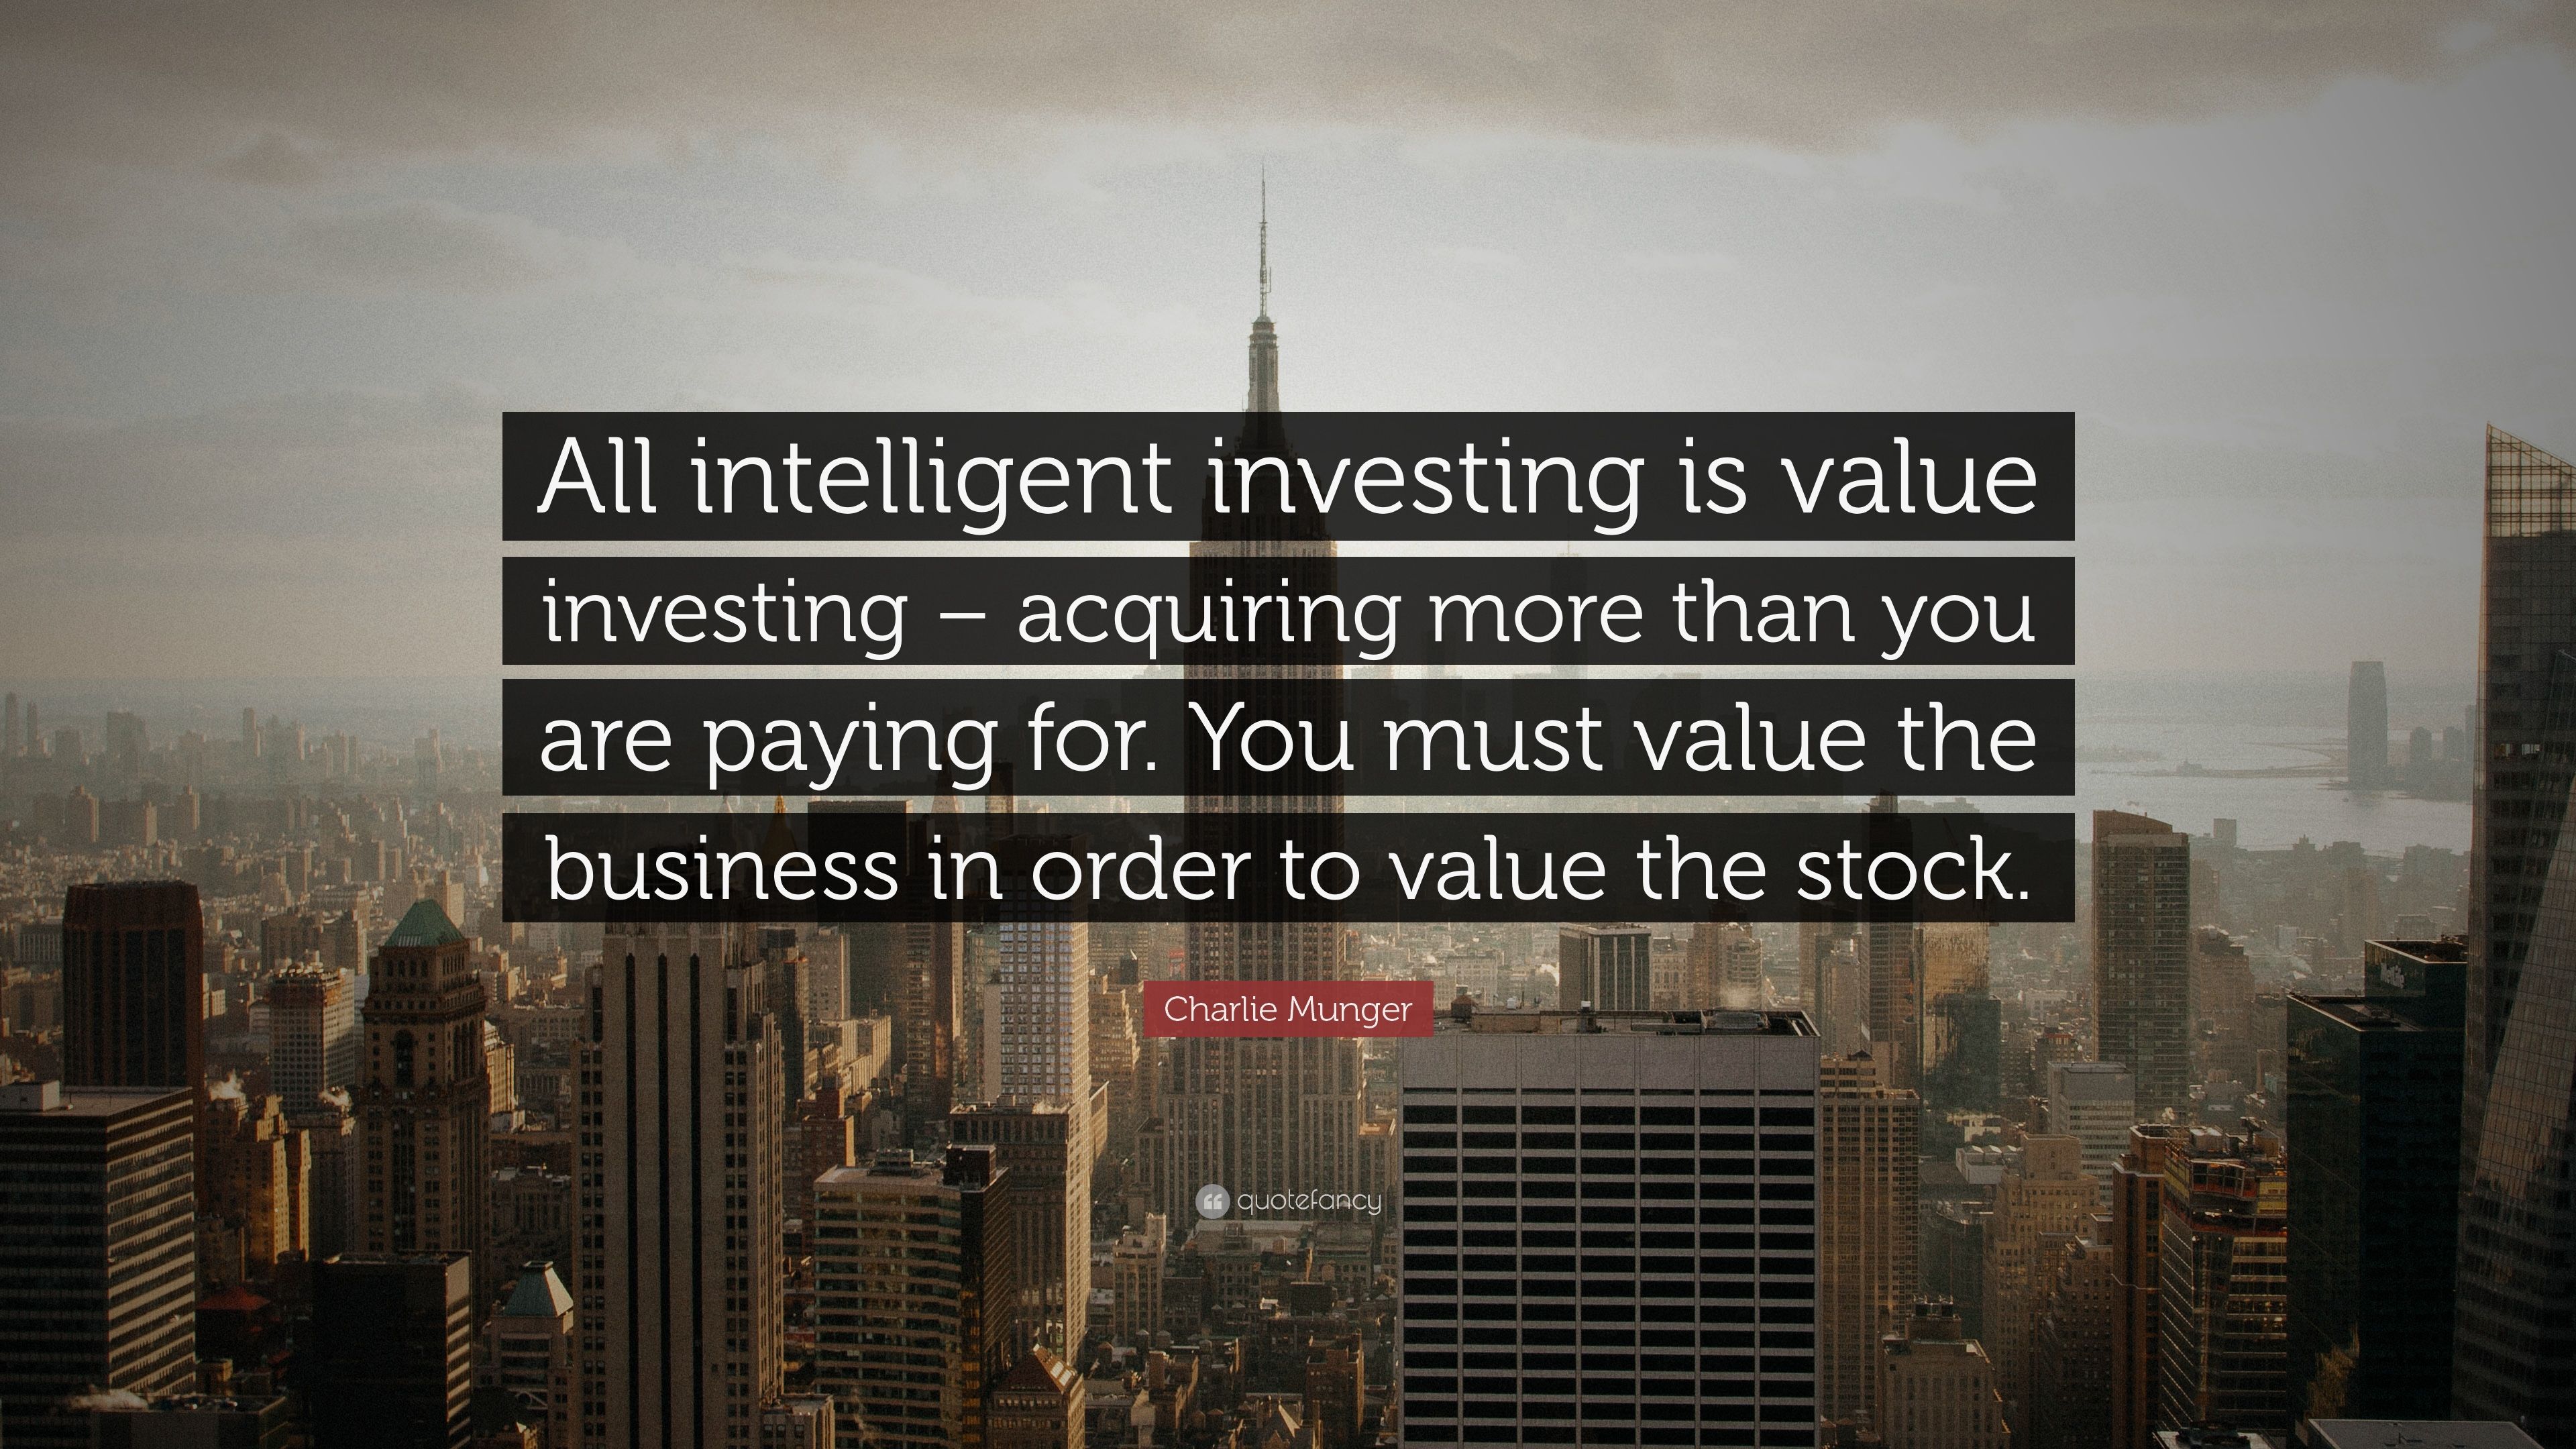 Charlie Munger Quote: “All intelligent investing is value